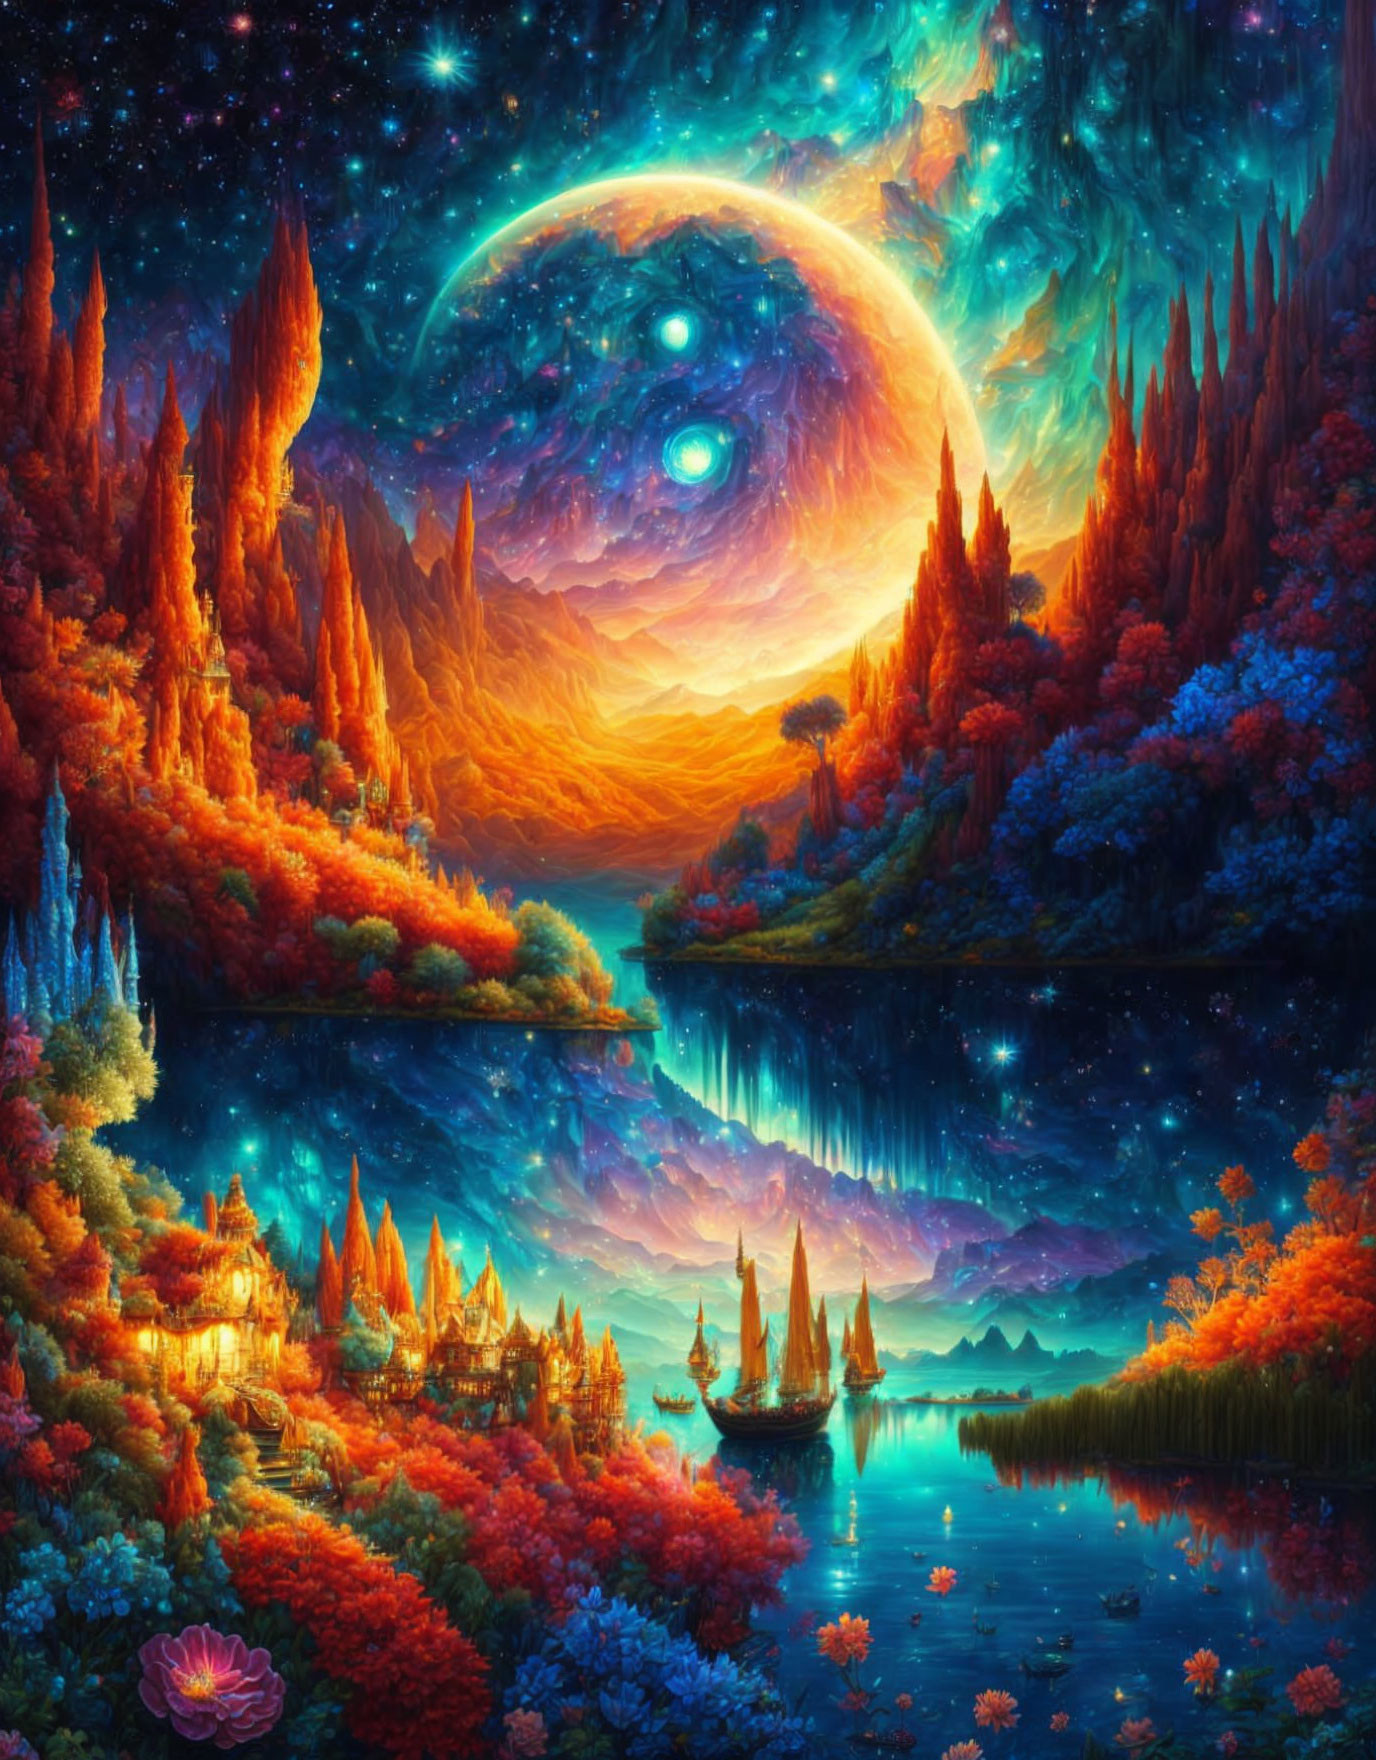 Ethereal fantasy landscape with glowing moon and fiery foliage